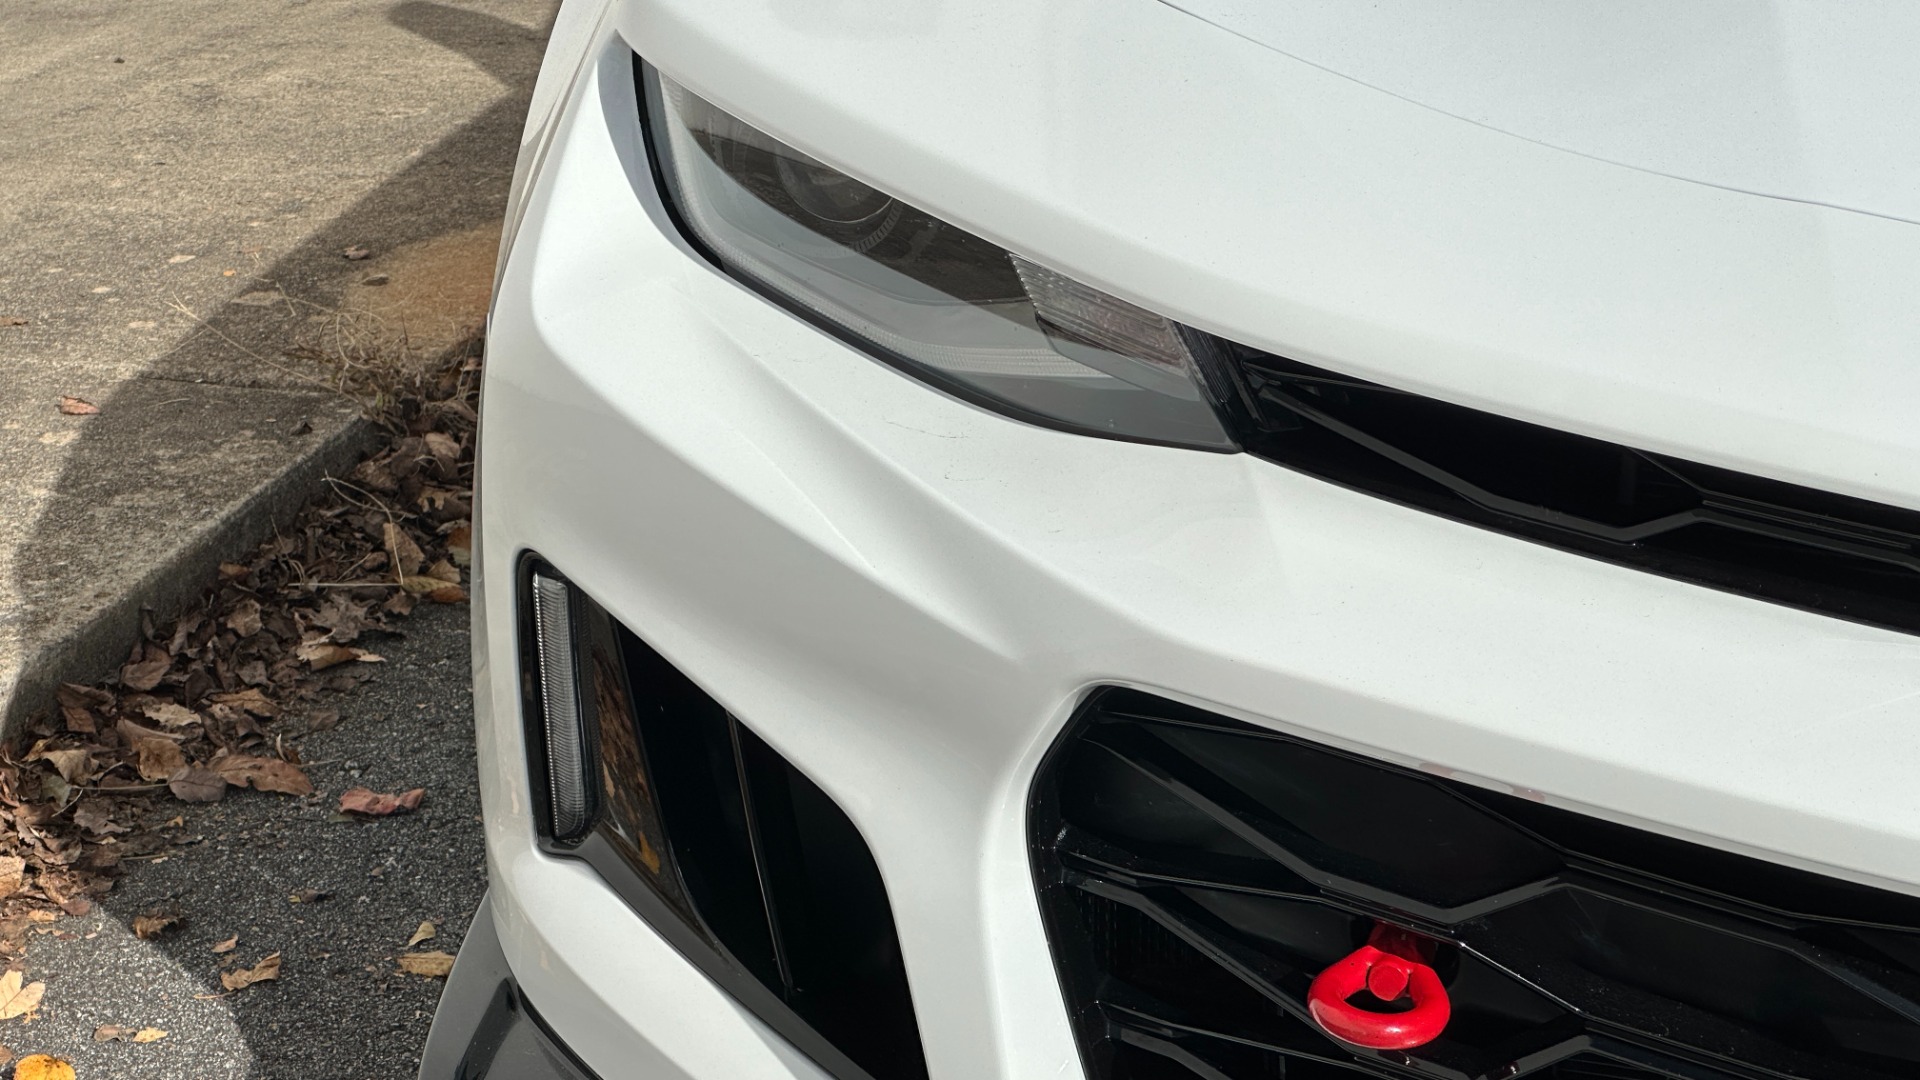 Used 2020 Chevrolet Camaro ZL1 / SUPERCHARGED / CARBON FIBER / RED SEAT BELTS / RECARO SEATING / 10SPD for sale $66,995 at Formula Imports in Charlotte NC 28227 29